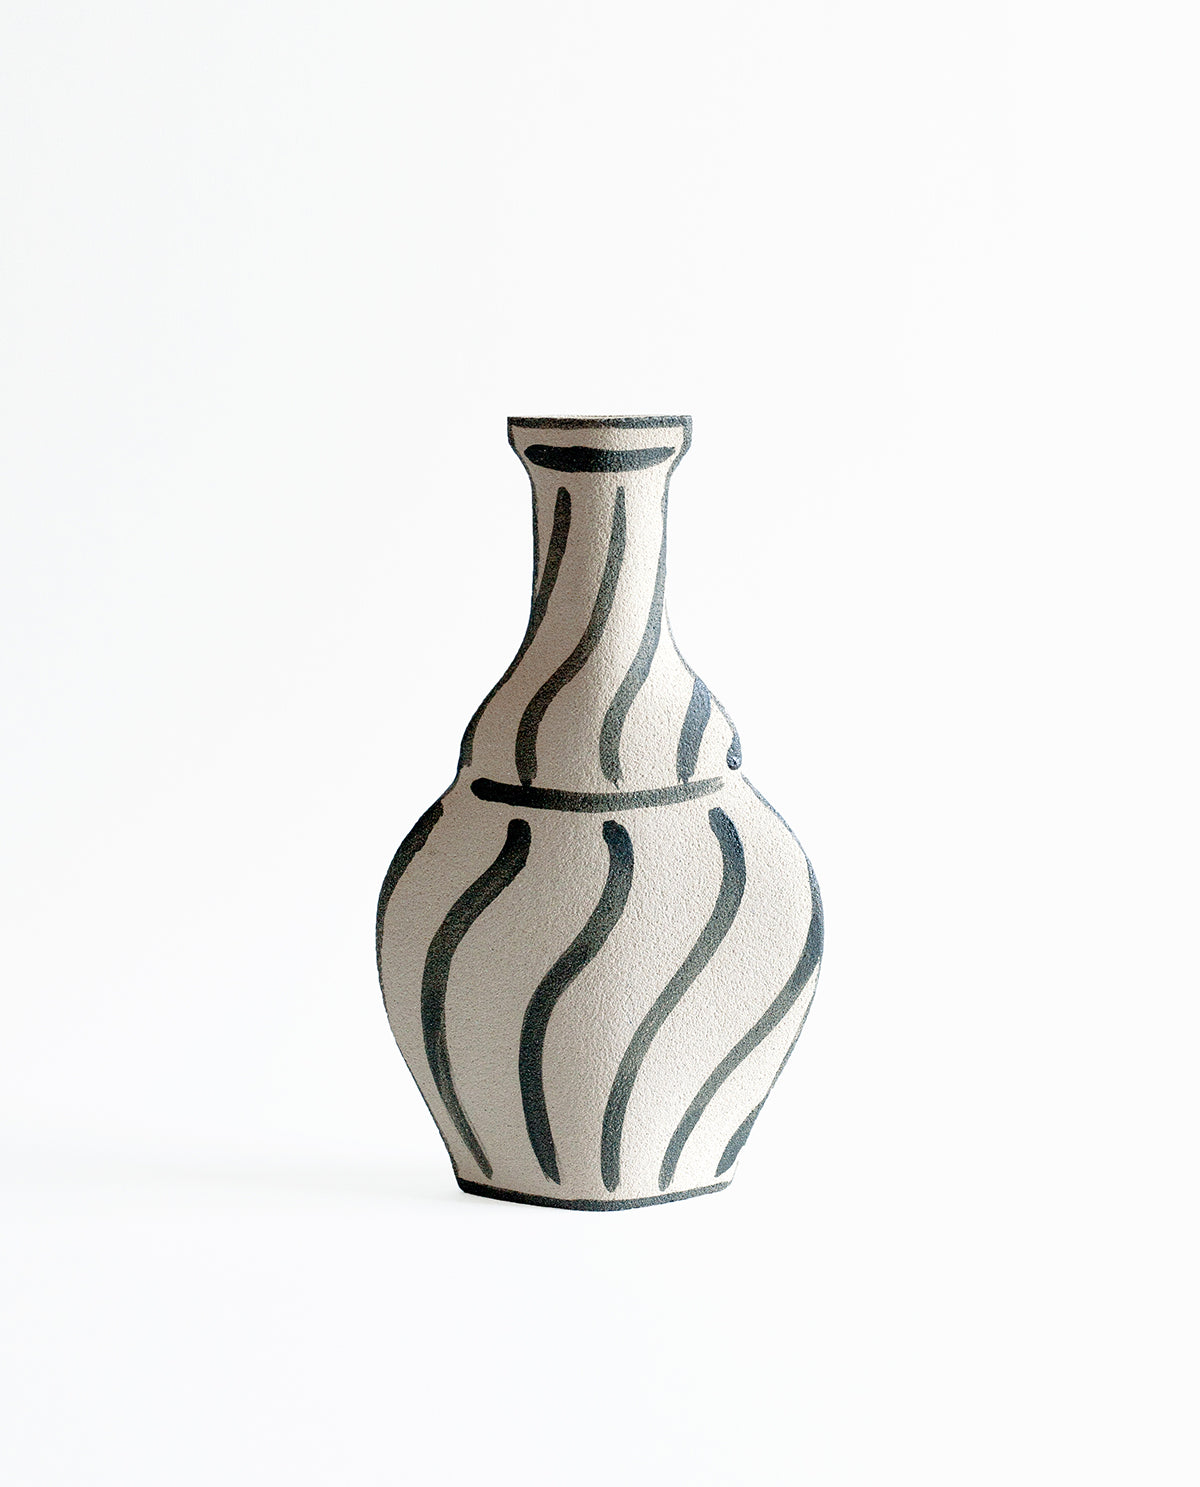 Hand-painted trompe l'oeil vase by INI CERAMIQUE with geometric patterns and a textured finish